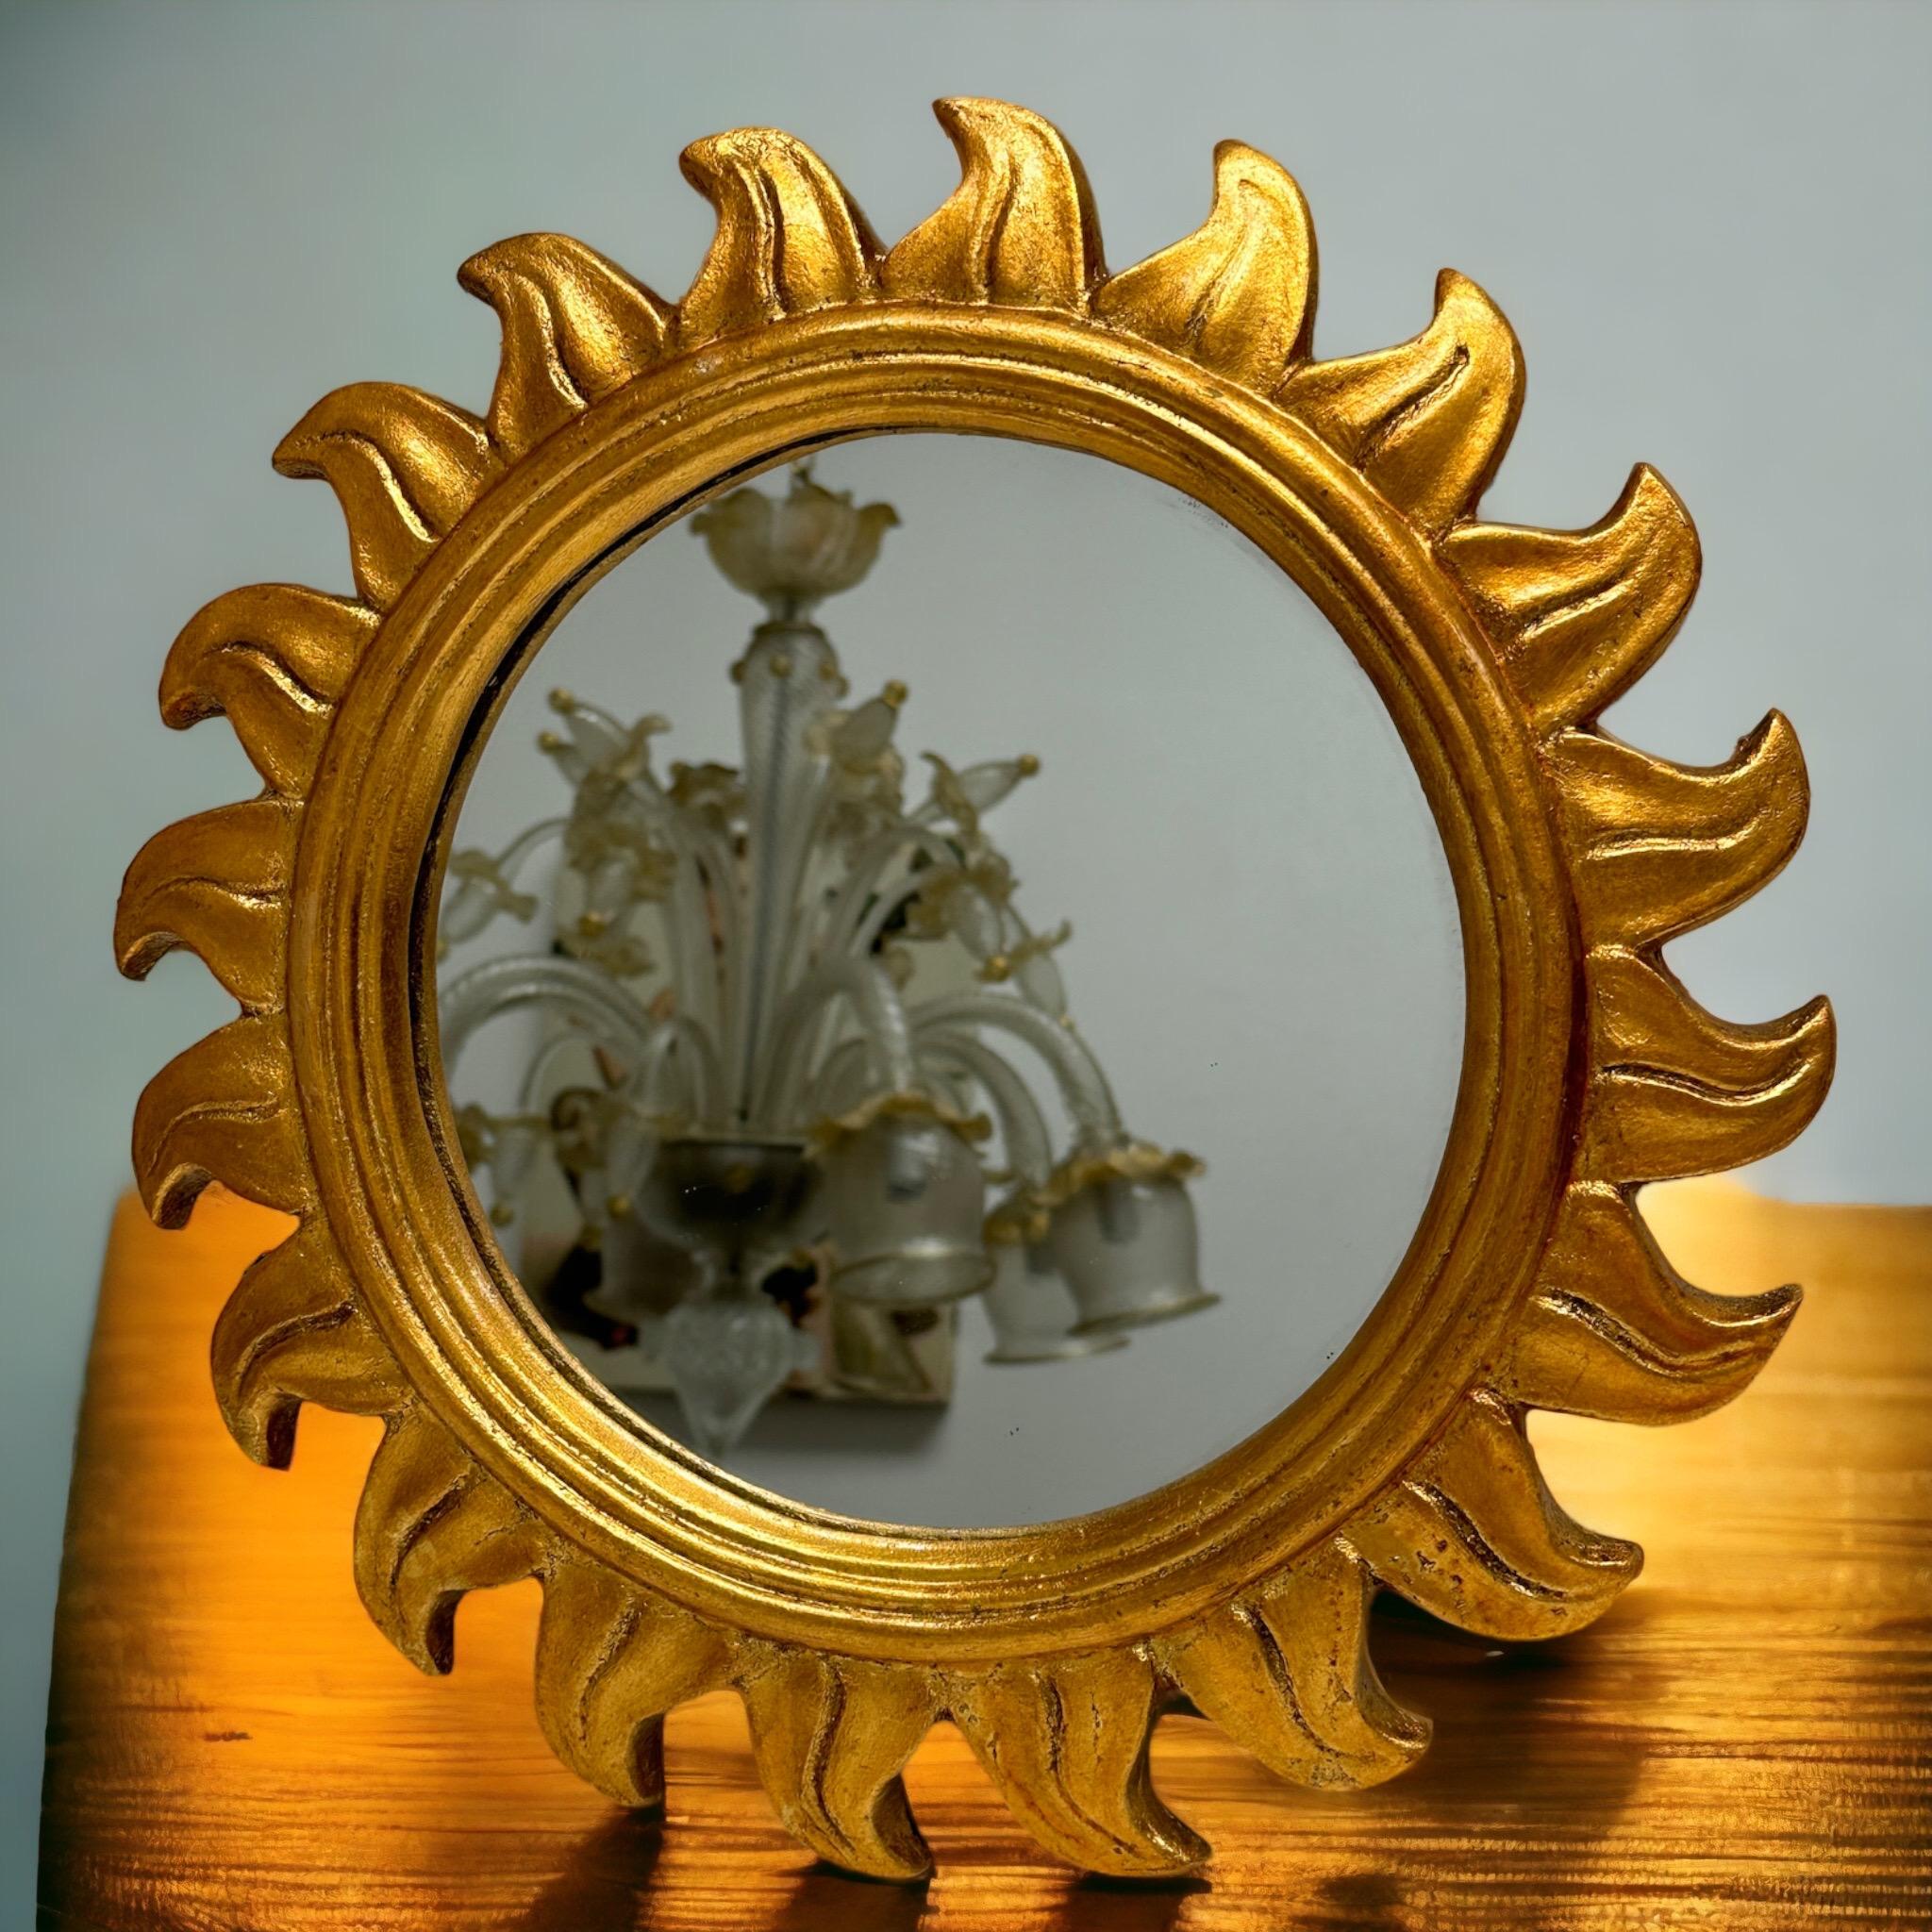 A gorgeous starburst sunburst or sun mirror. Made of gilded Resin. No chips, no cracks, no repairs. It measures approximate: 14.5